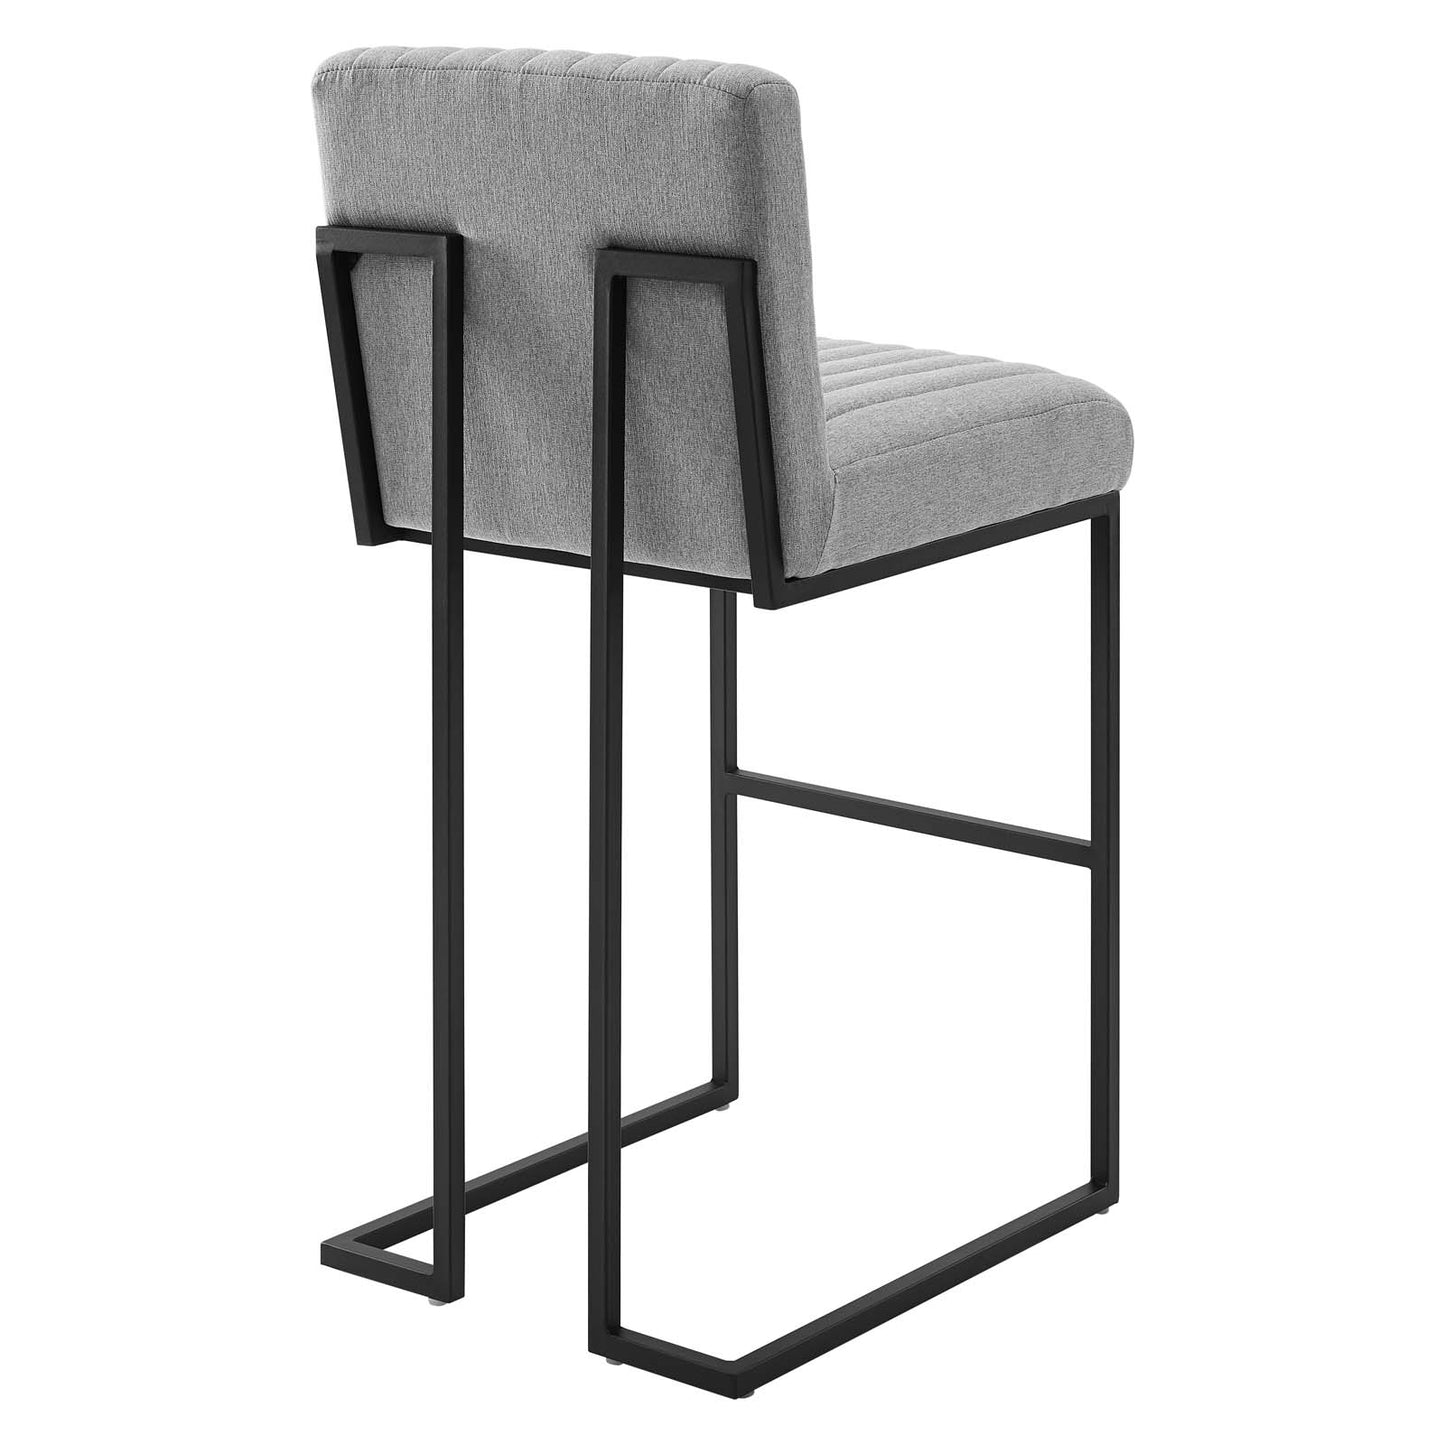 Indulge Channel Tufted Fabric Bar Stool